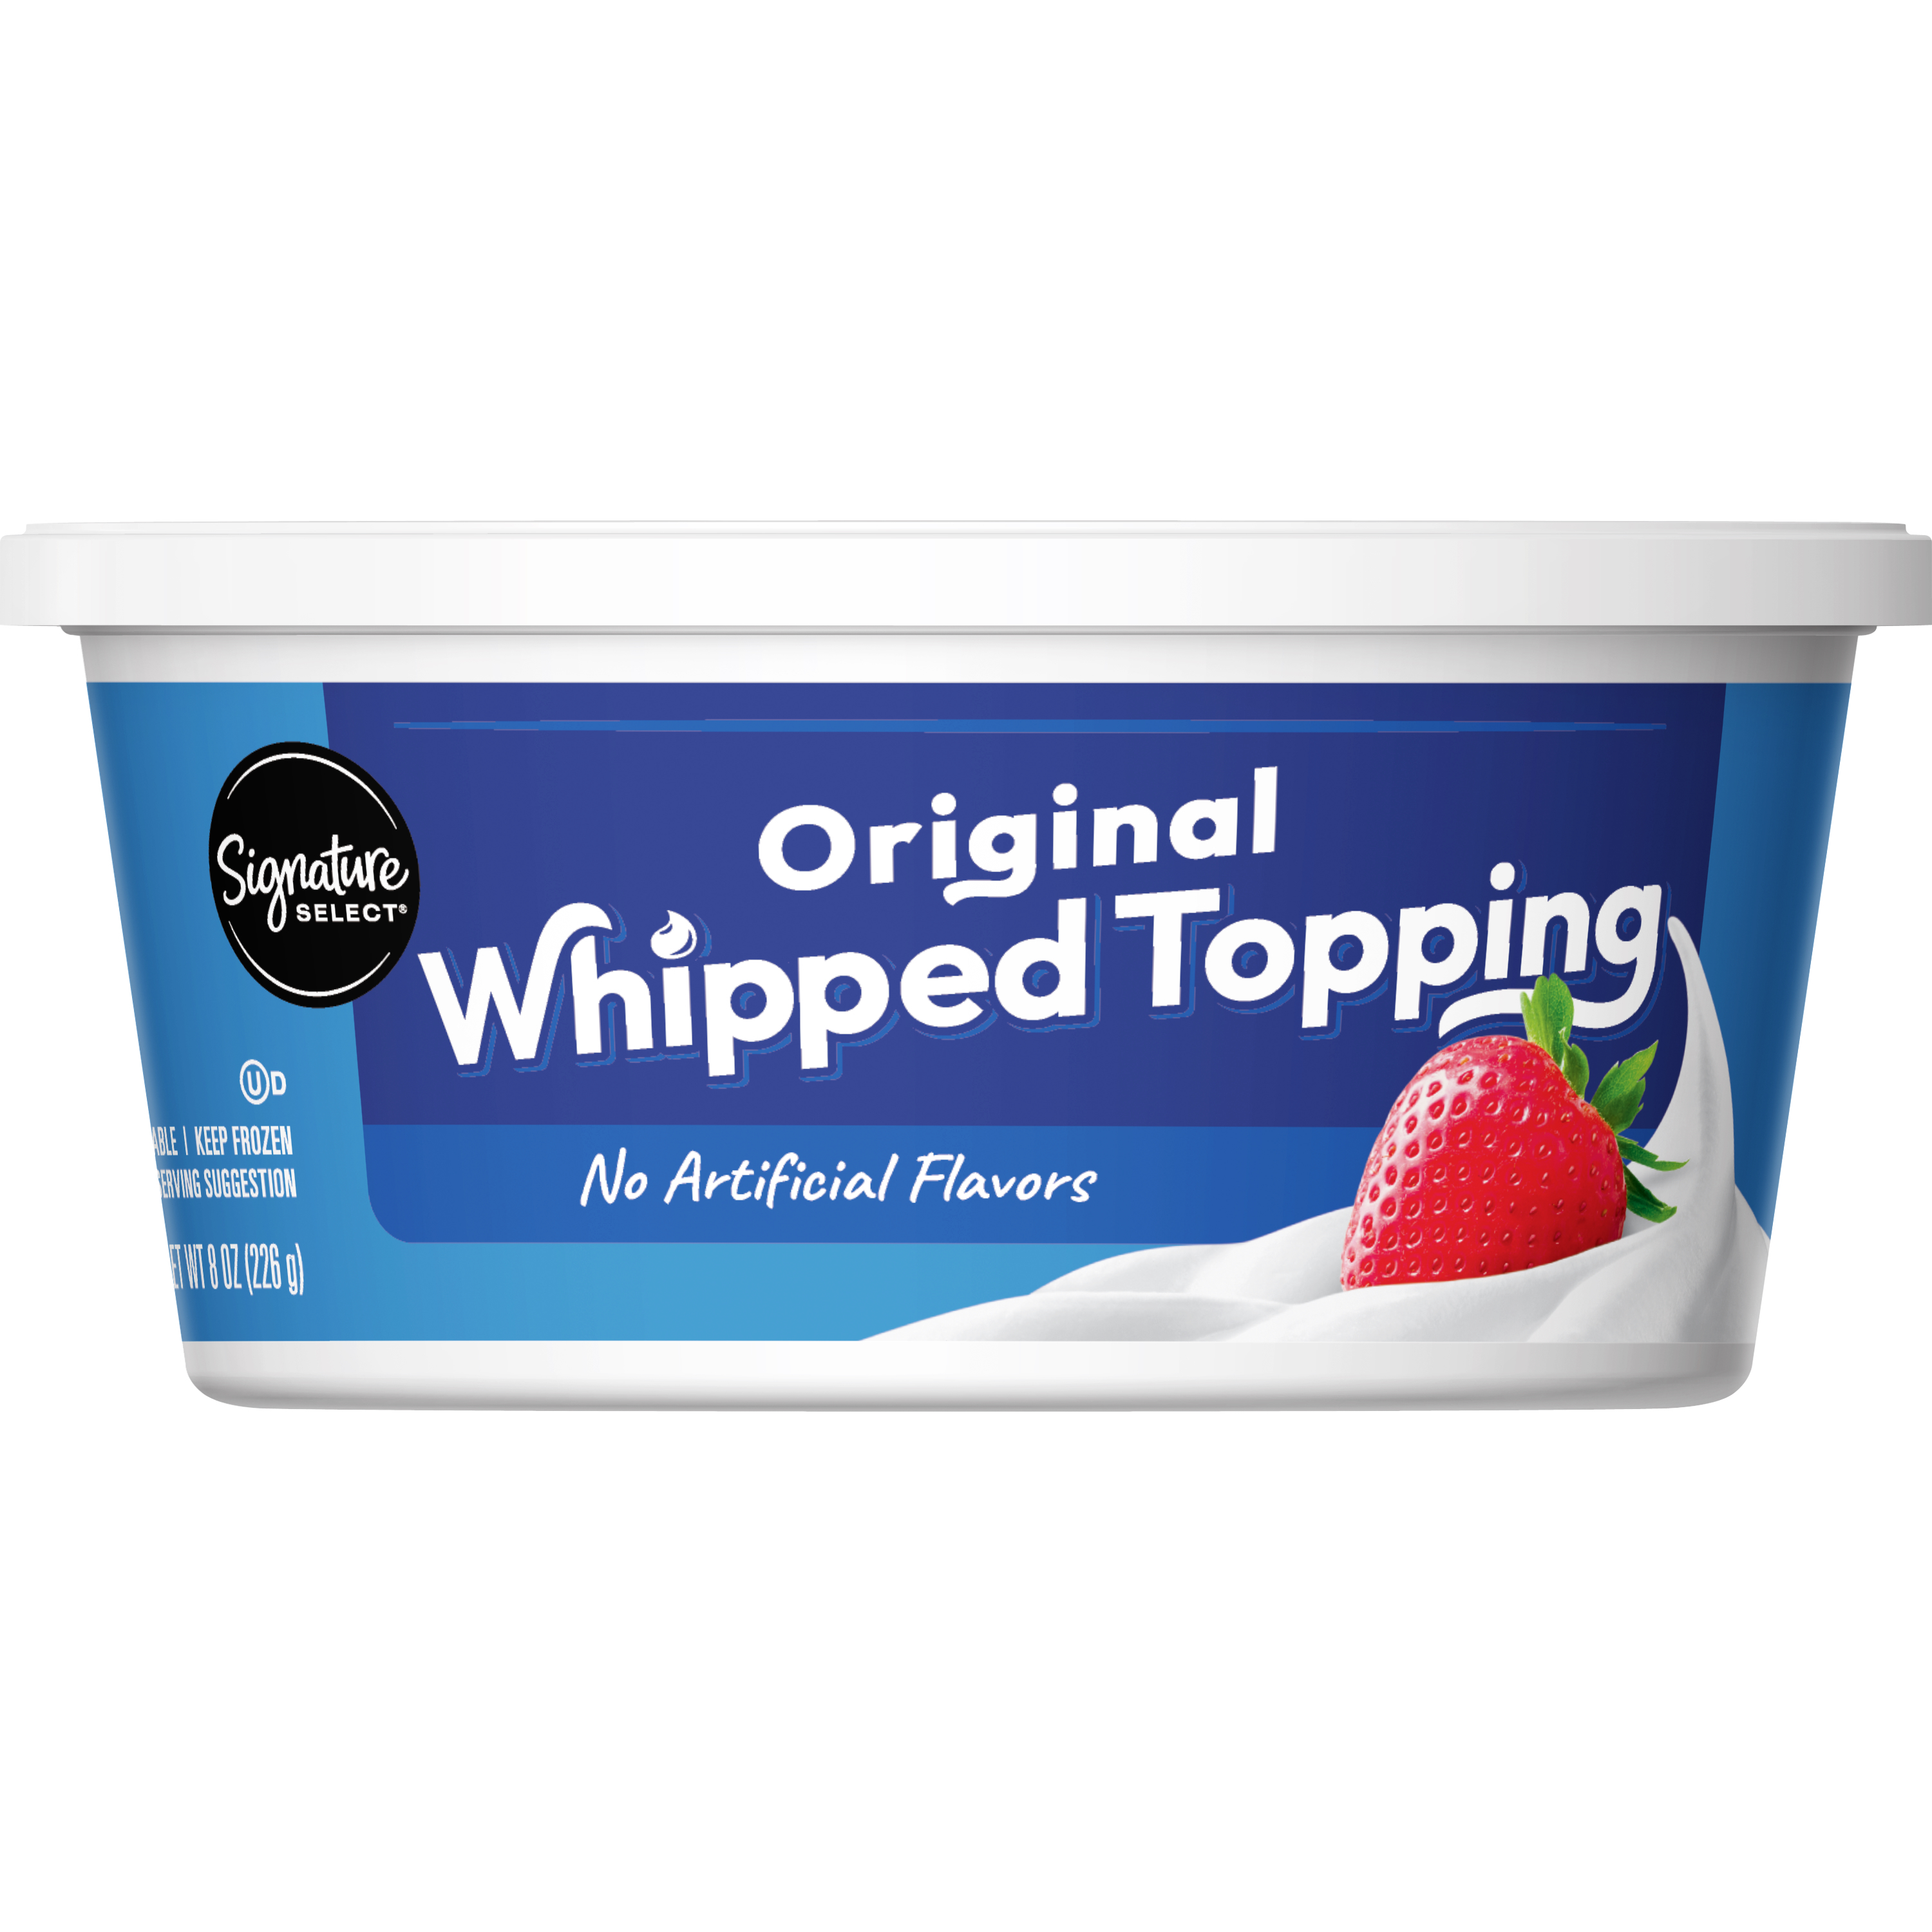 Container of Signature Select Original Whipped Topping with a strawberry image